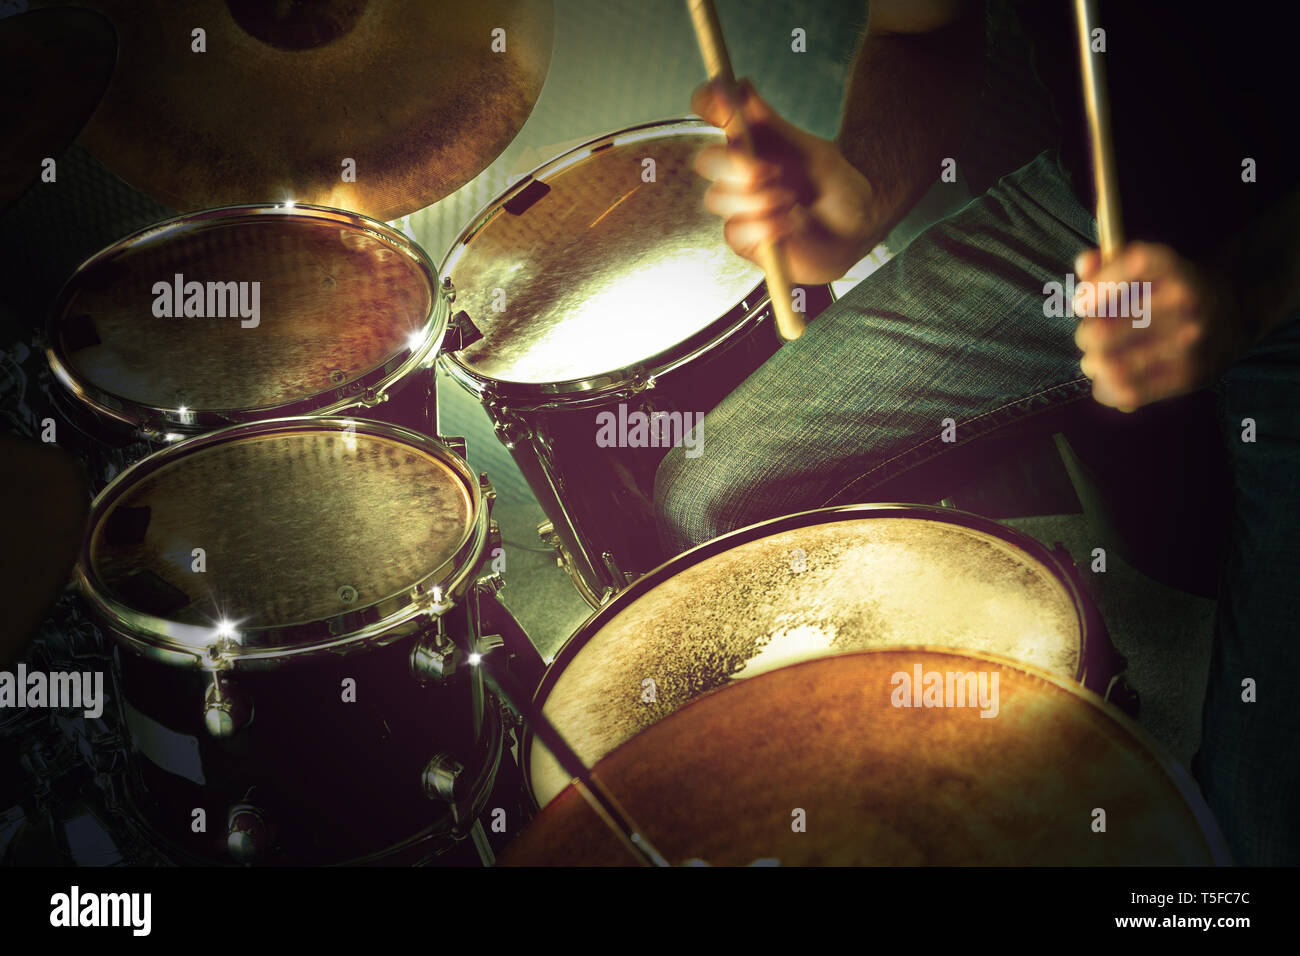 Musical performance on stage.Recreation and music show.Drum on stage.Live music and instruments. Stock Photo